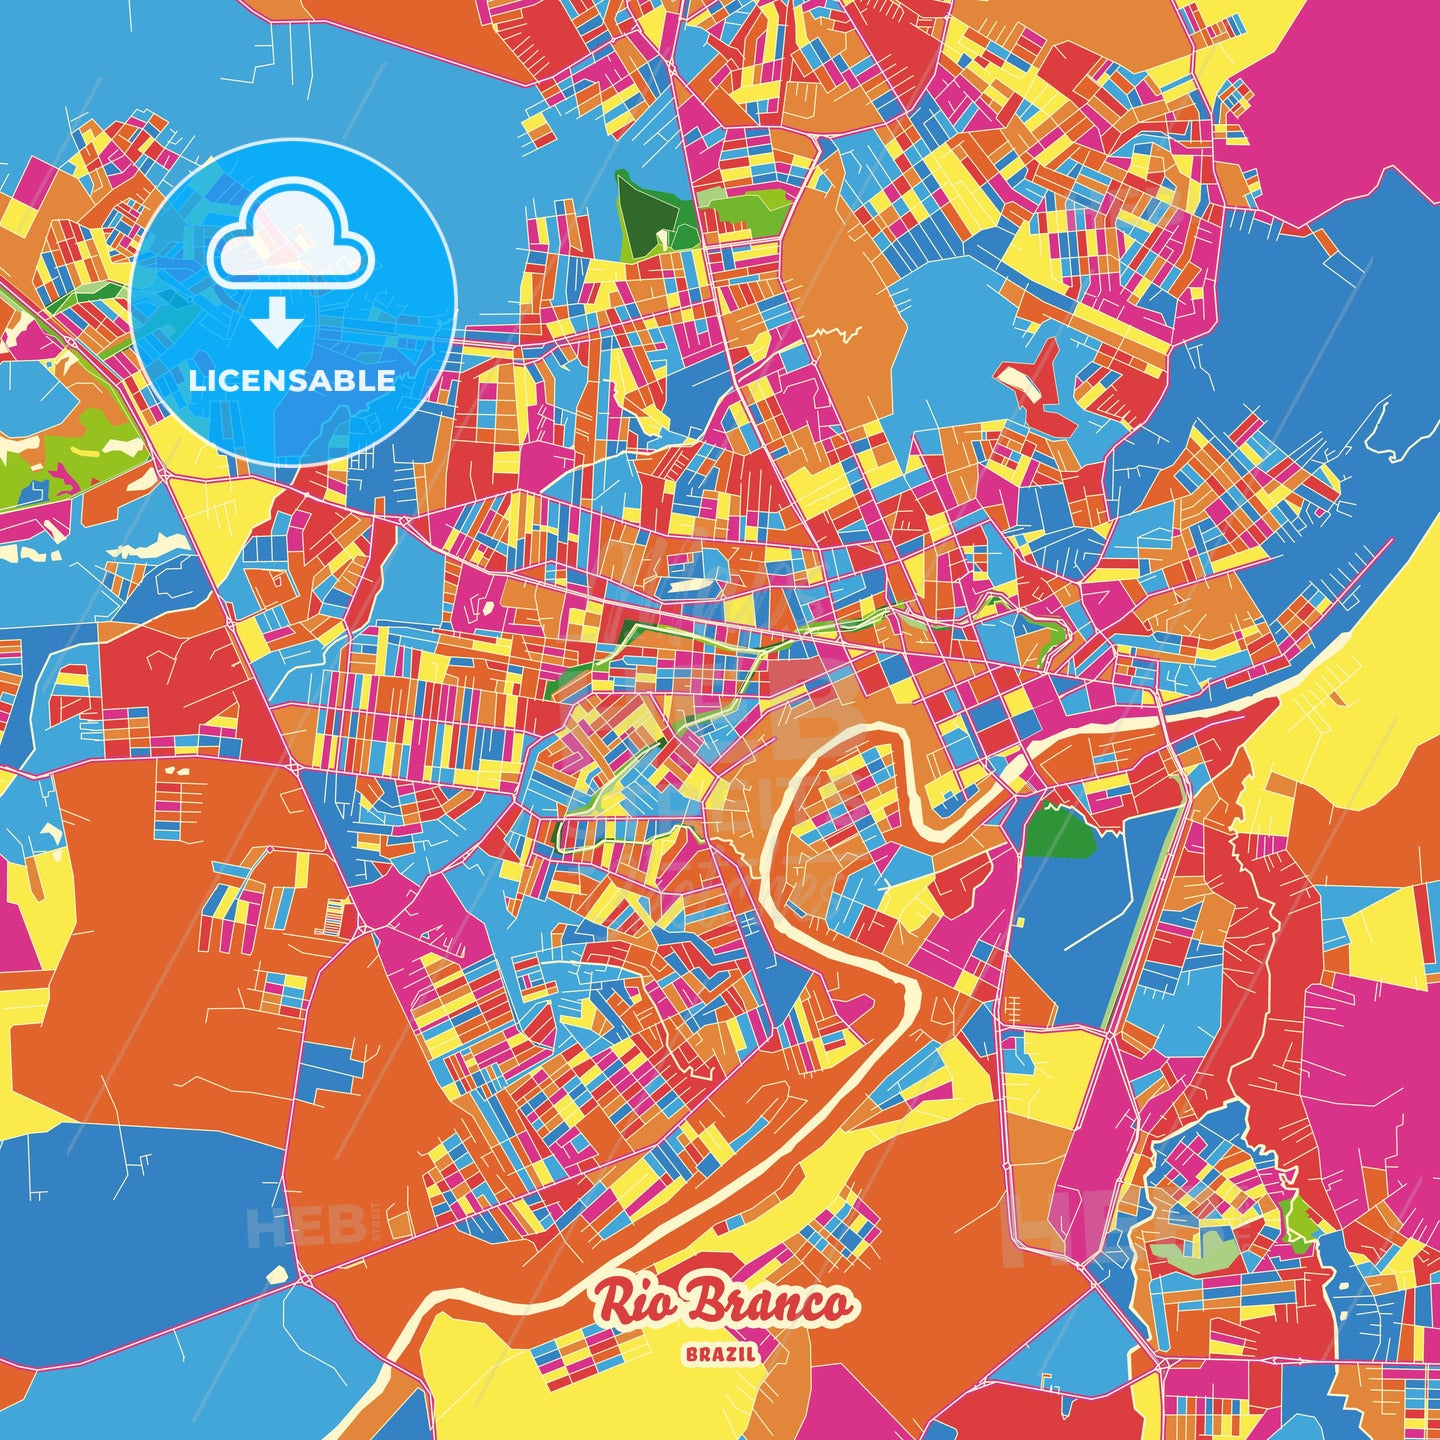 Rio Branco, Brazil Crazy Colorful Street Map Poster Template - HEBSTREITS Sketches